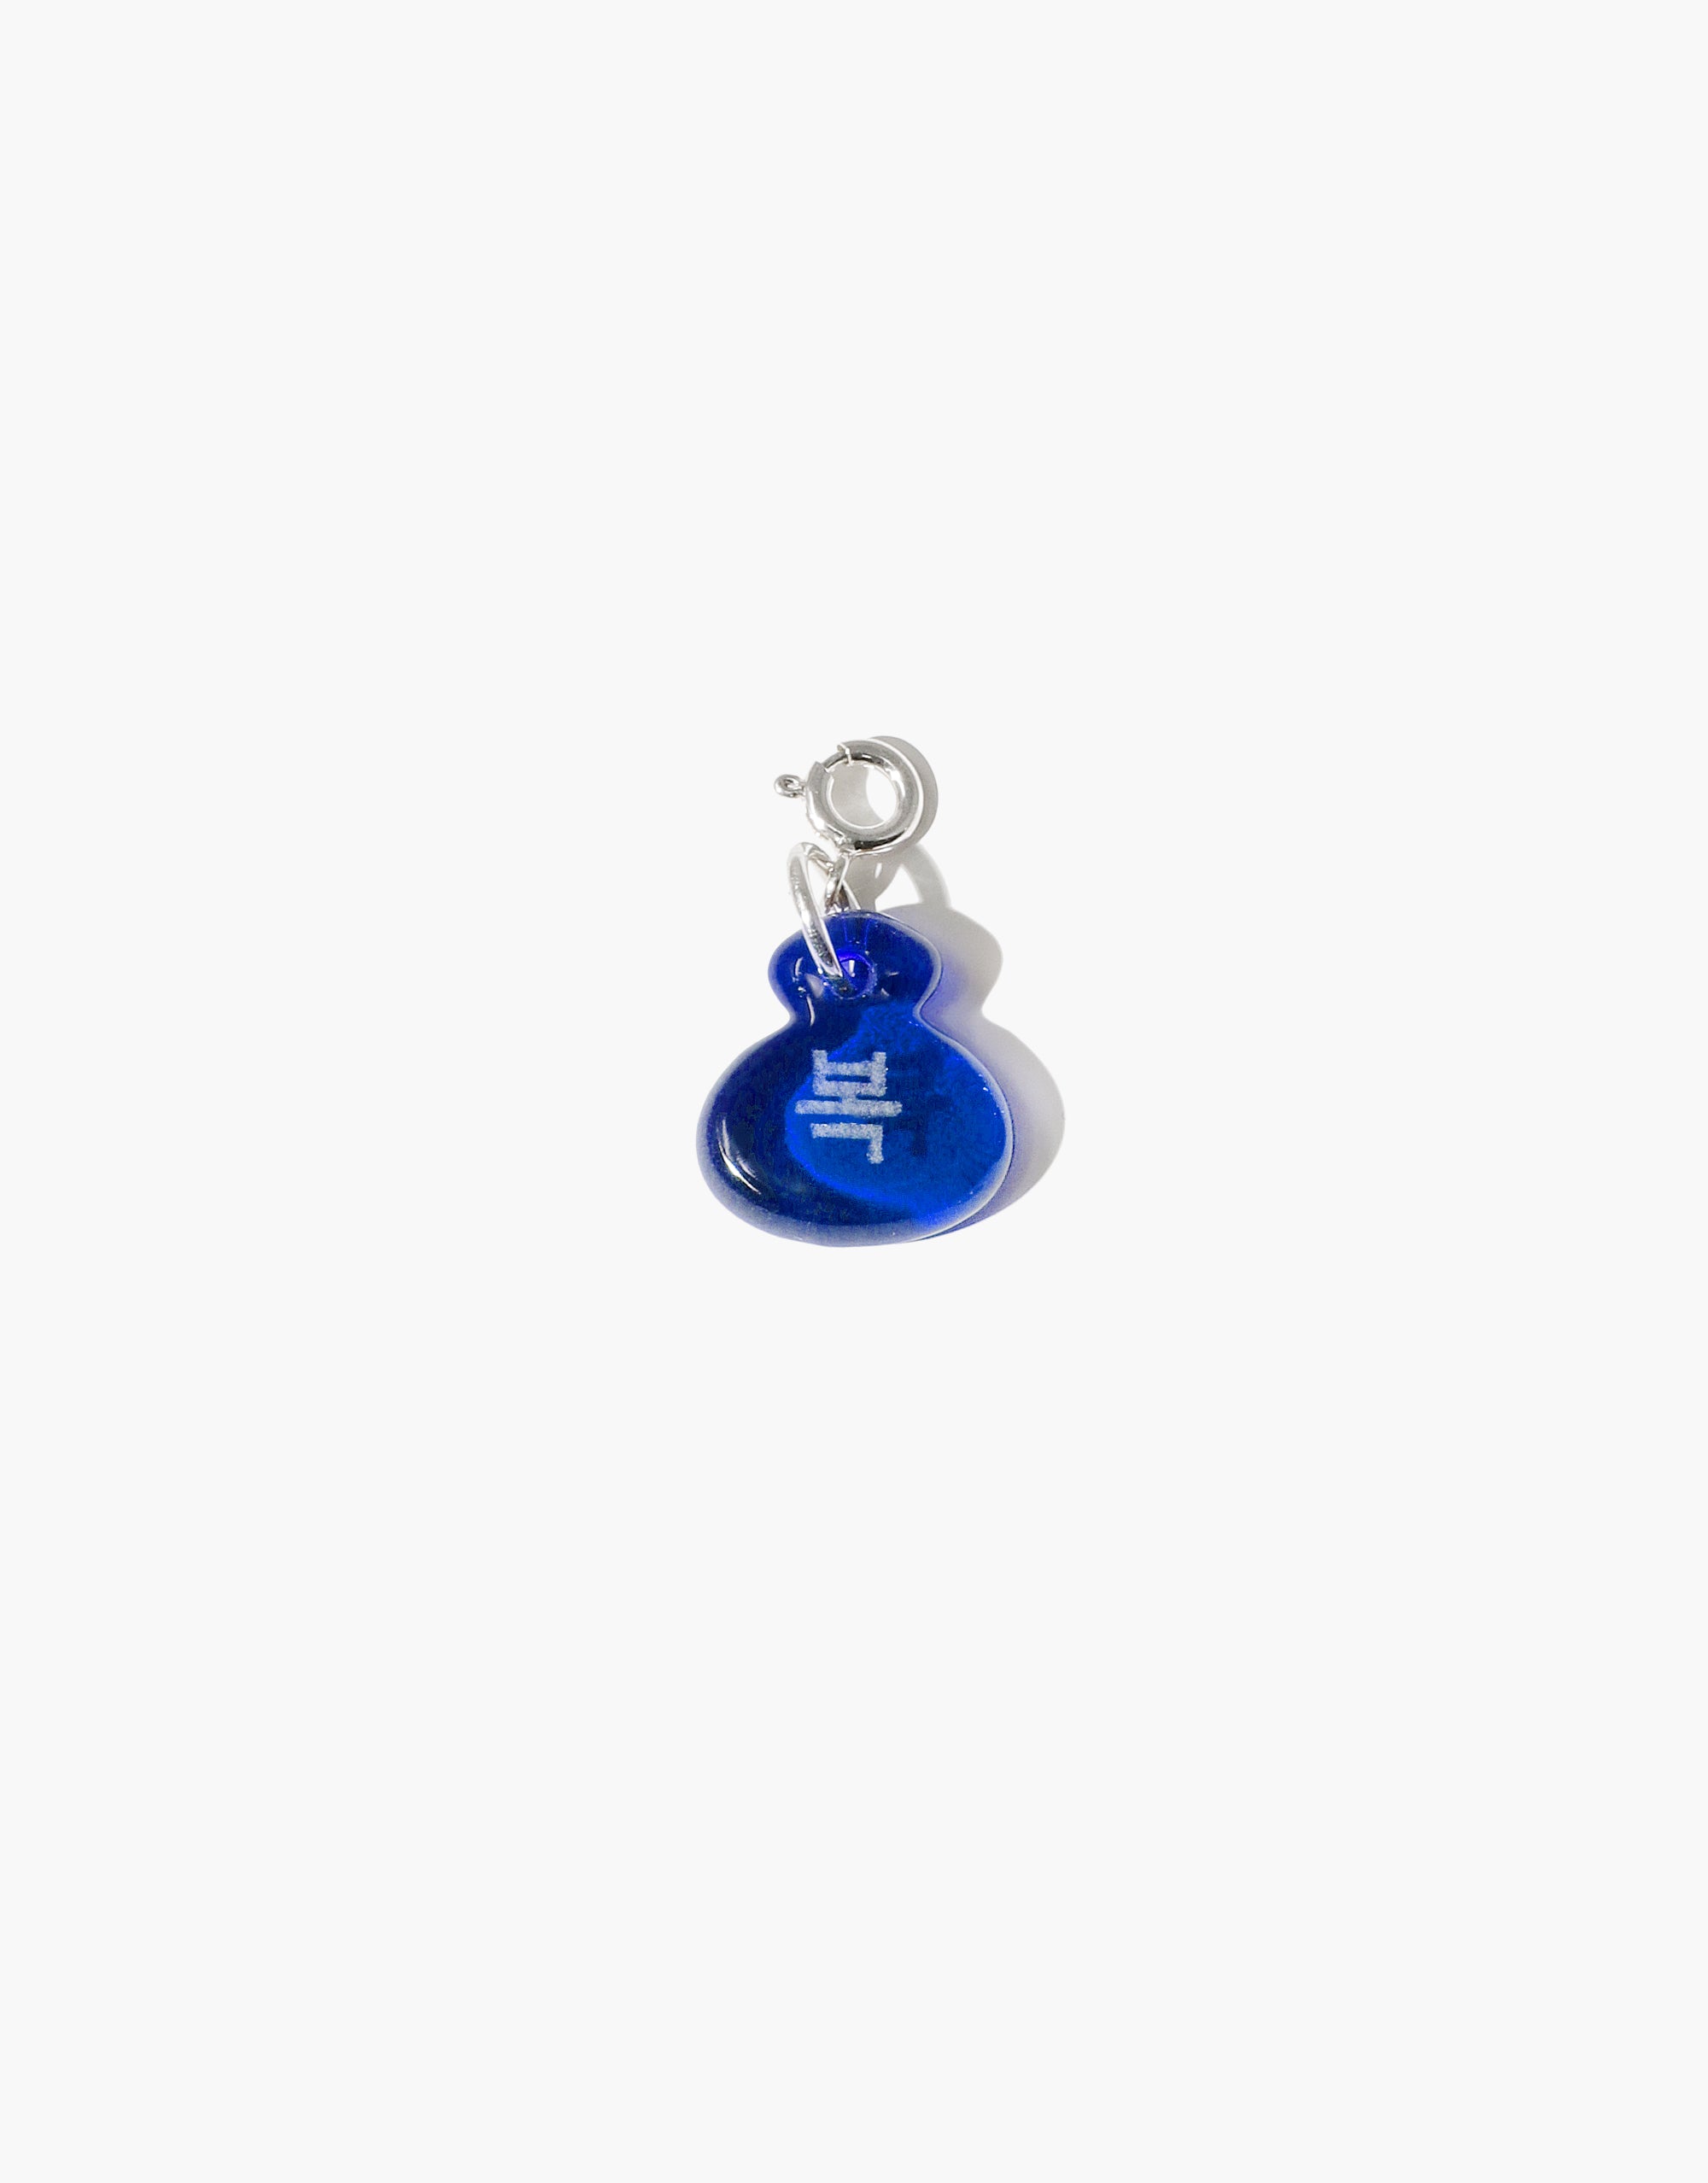 Big Blue LV Charm Set Charms Trimmed in Silver-Comes With 10 Charms